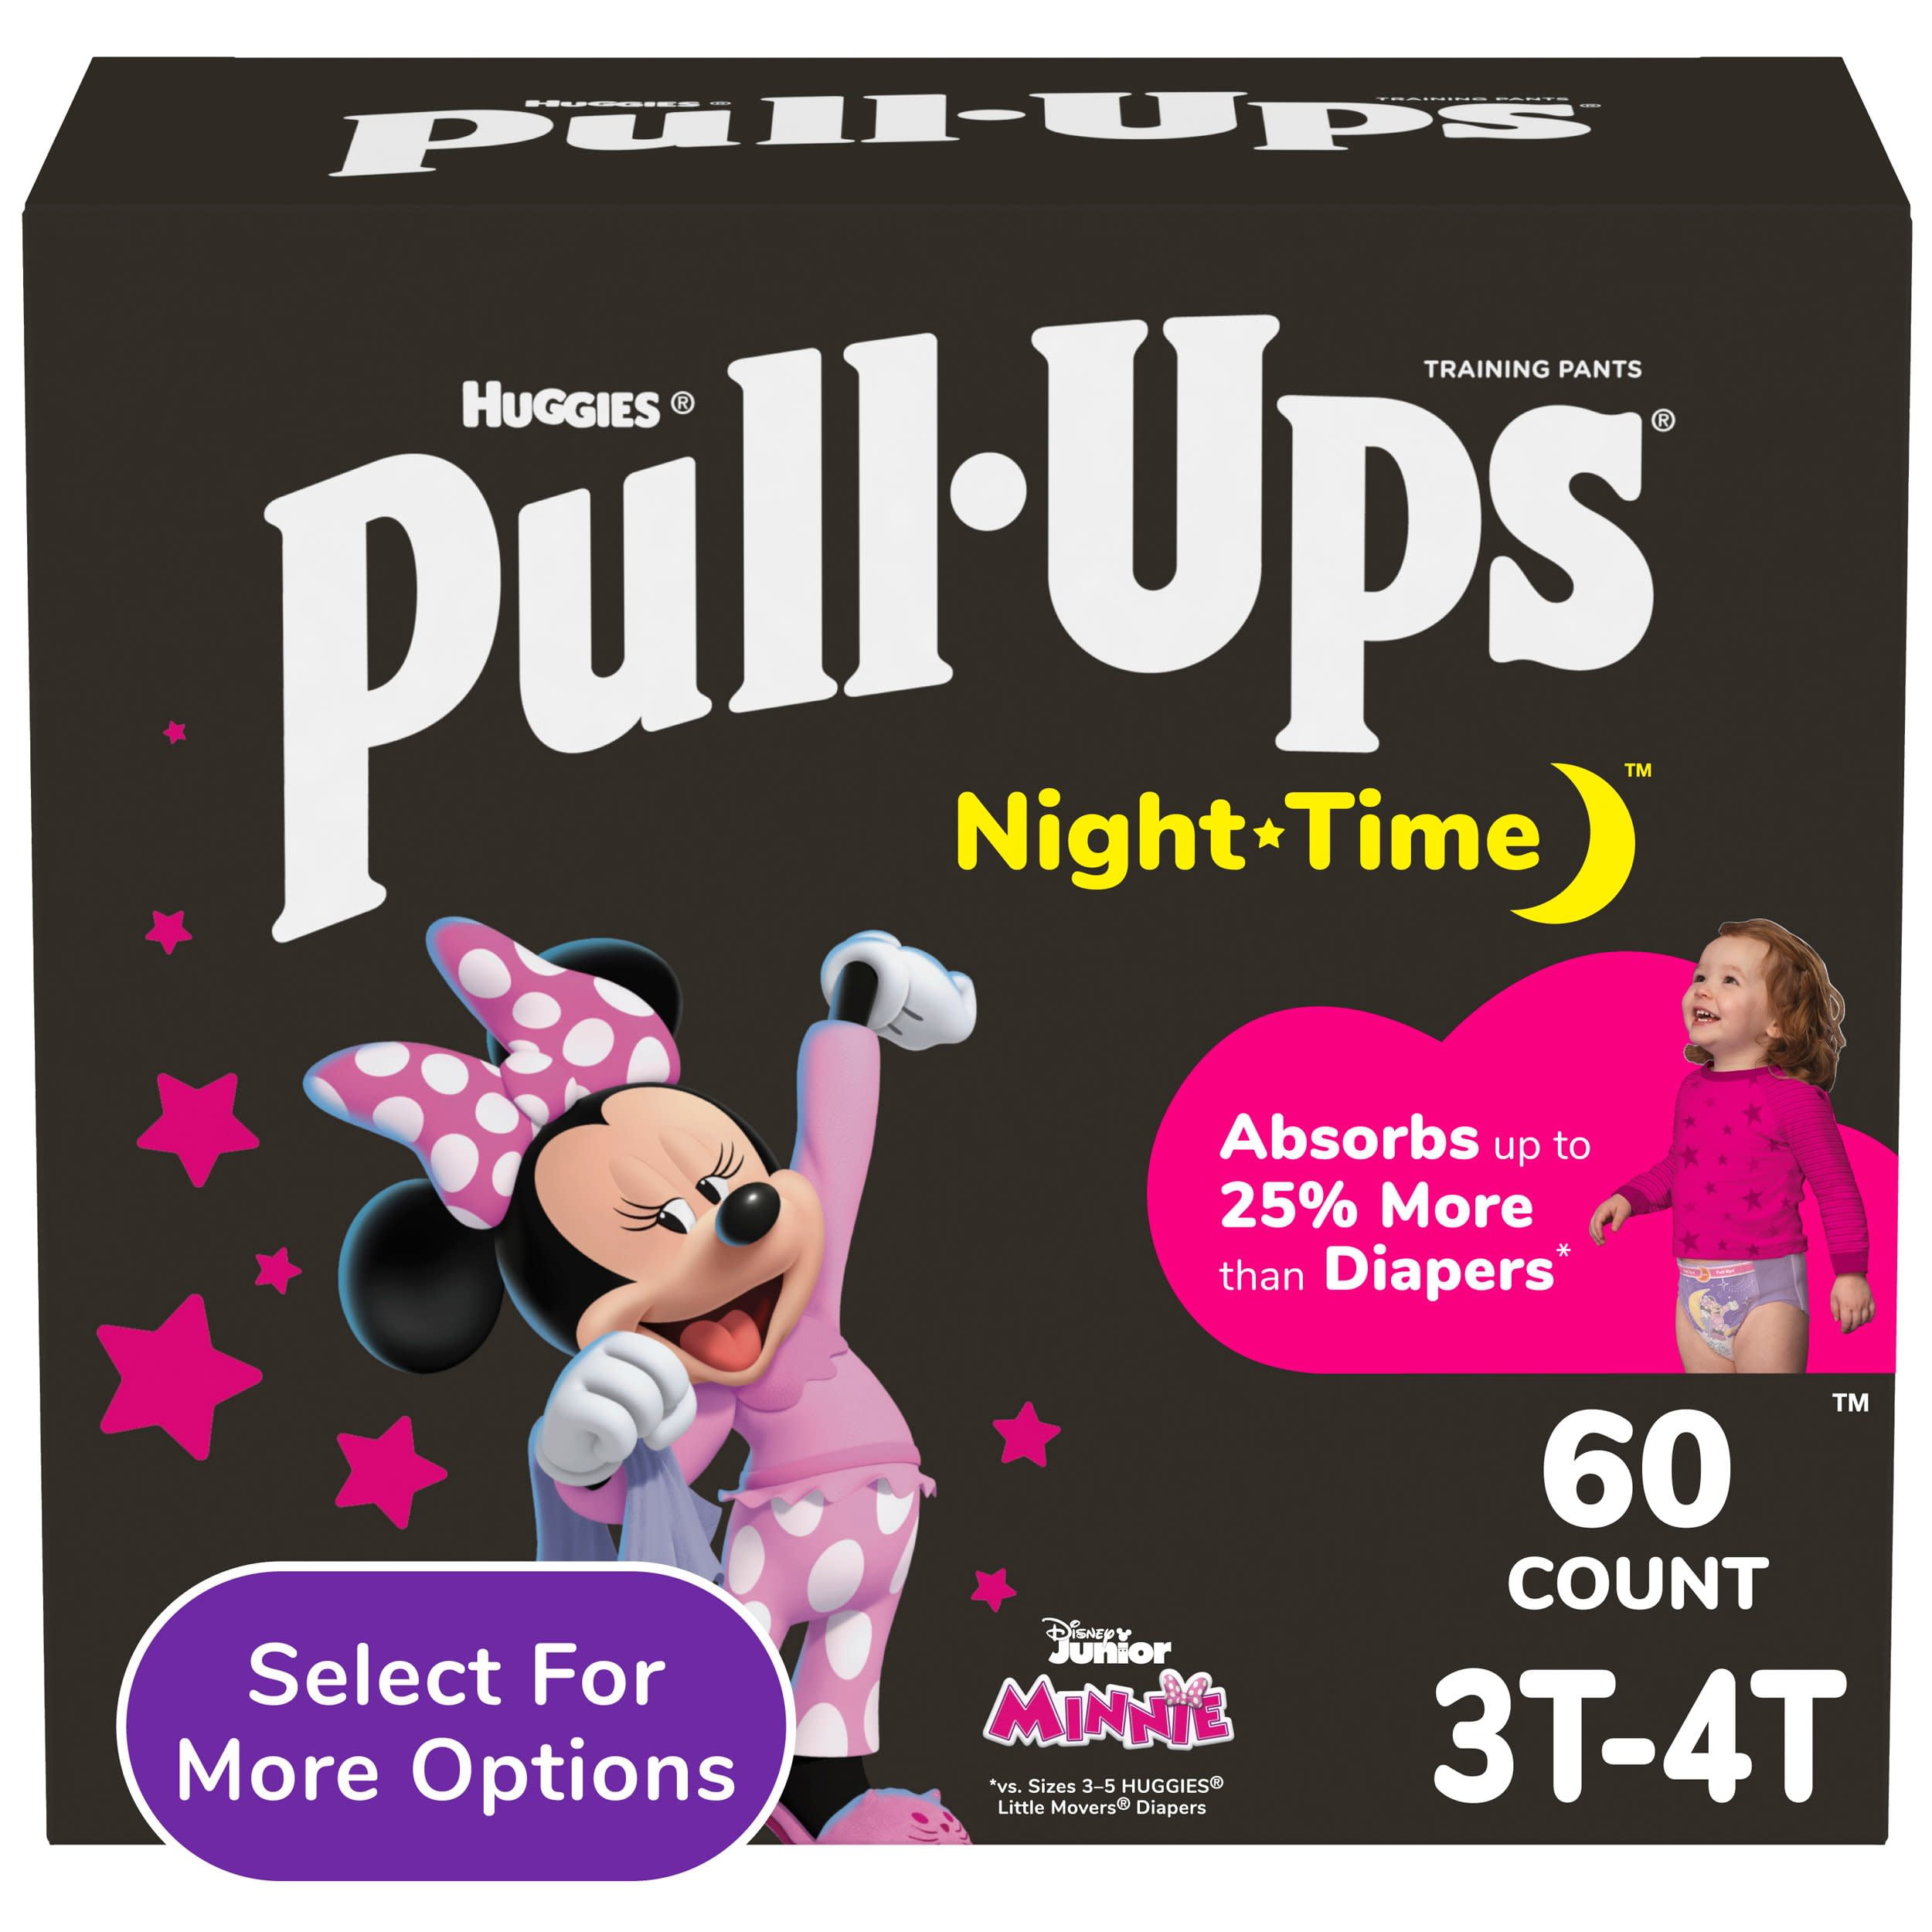 HUGGIES PULL-UPS PLUS BOYS 2T-3T PACK OF 128 at Costco 3180 Laird